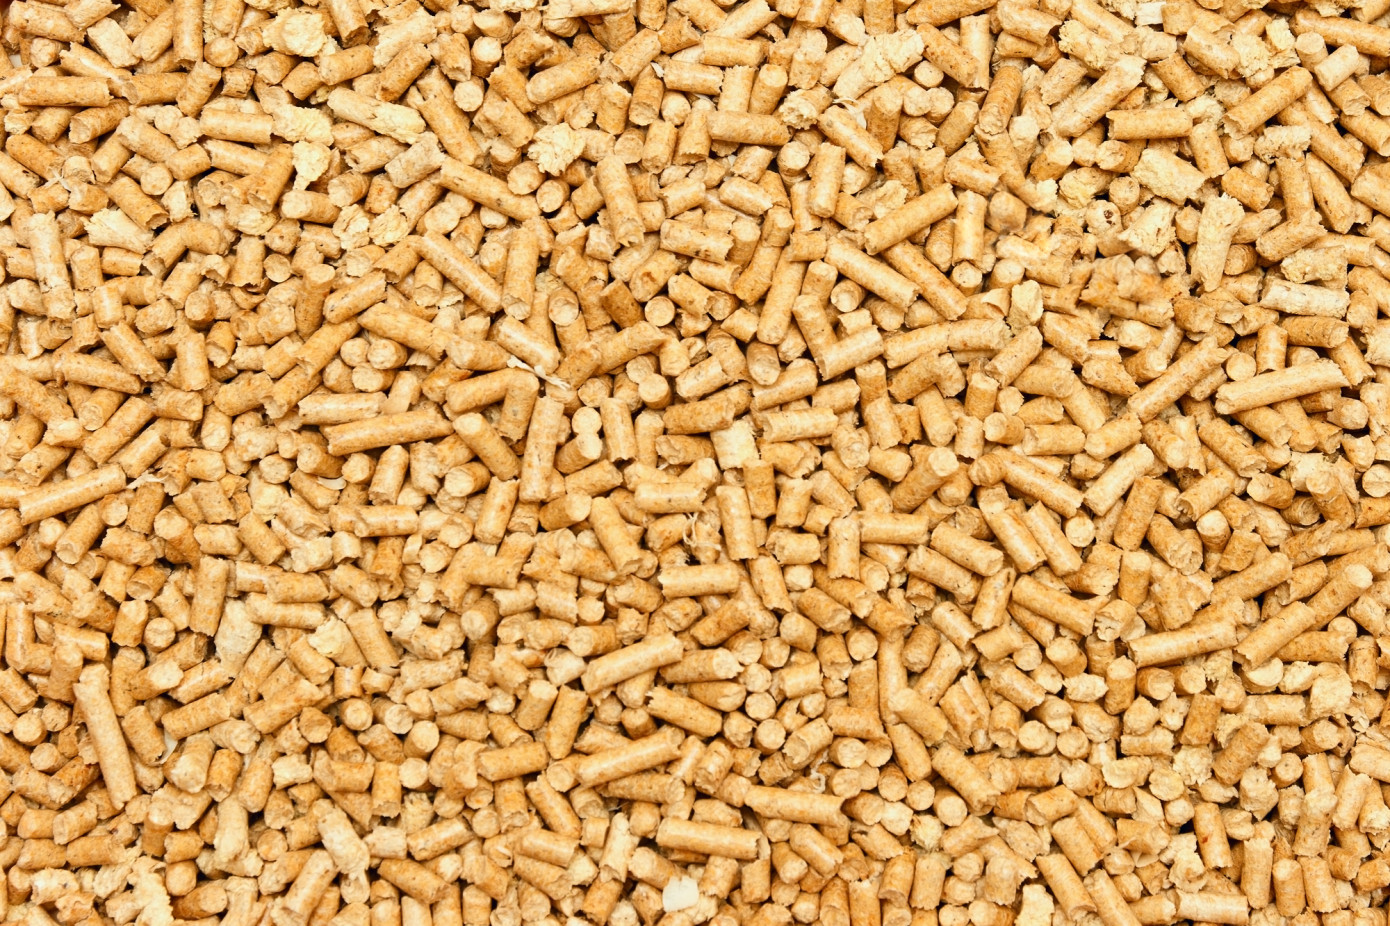 Imports of wood pellets to European Union decrease 27% in January